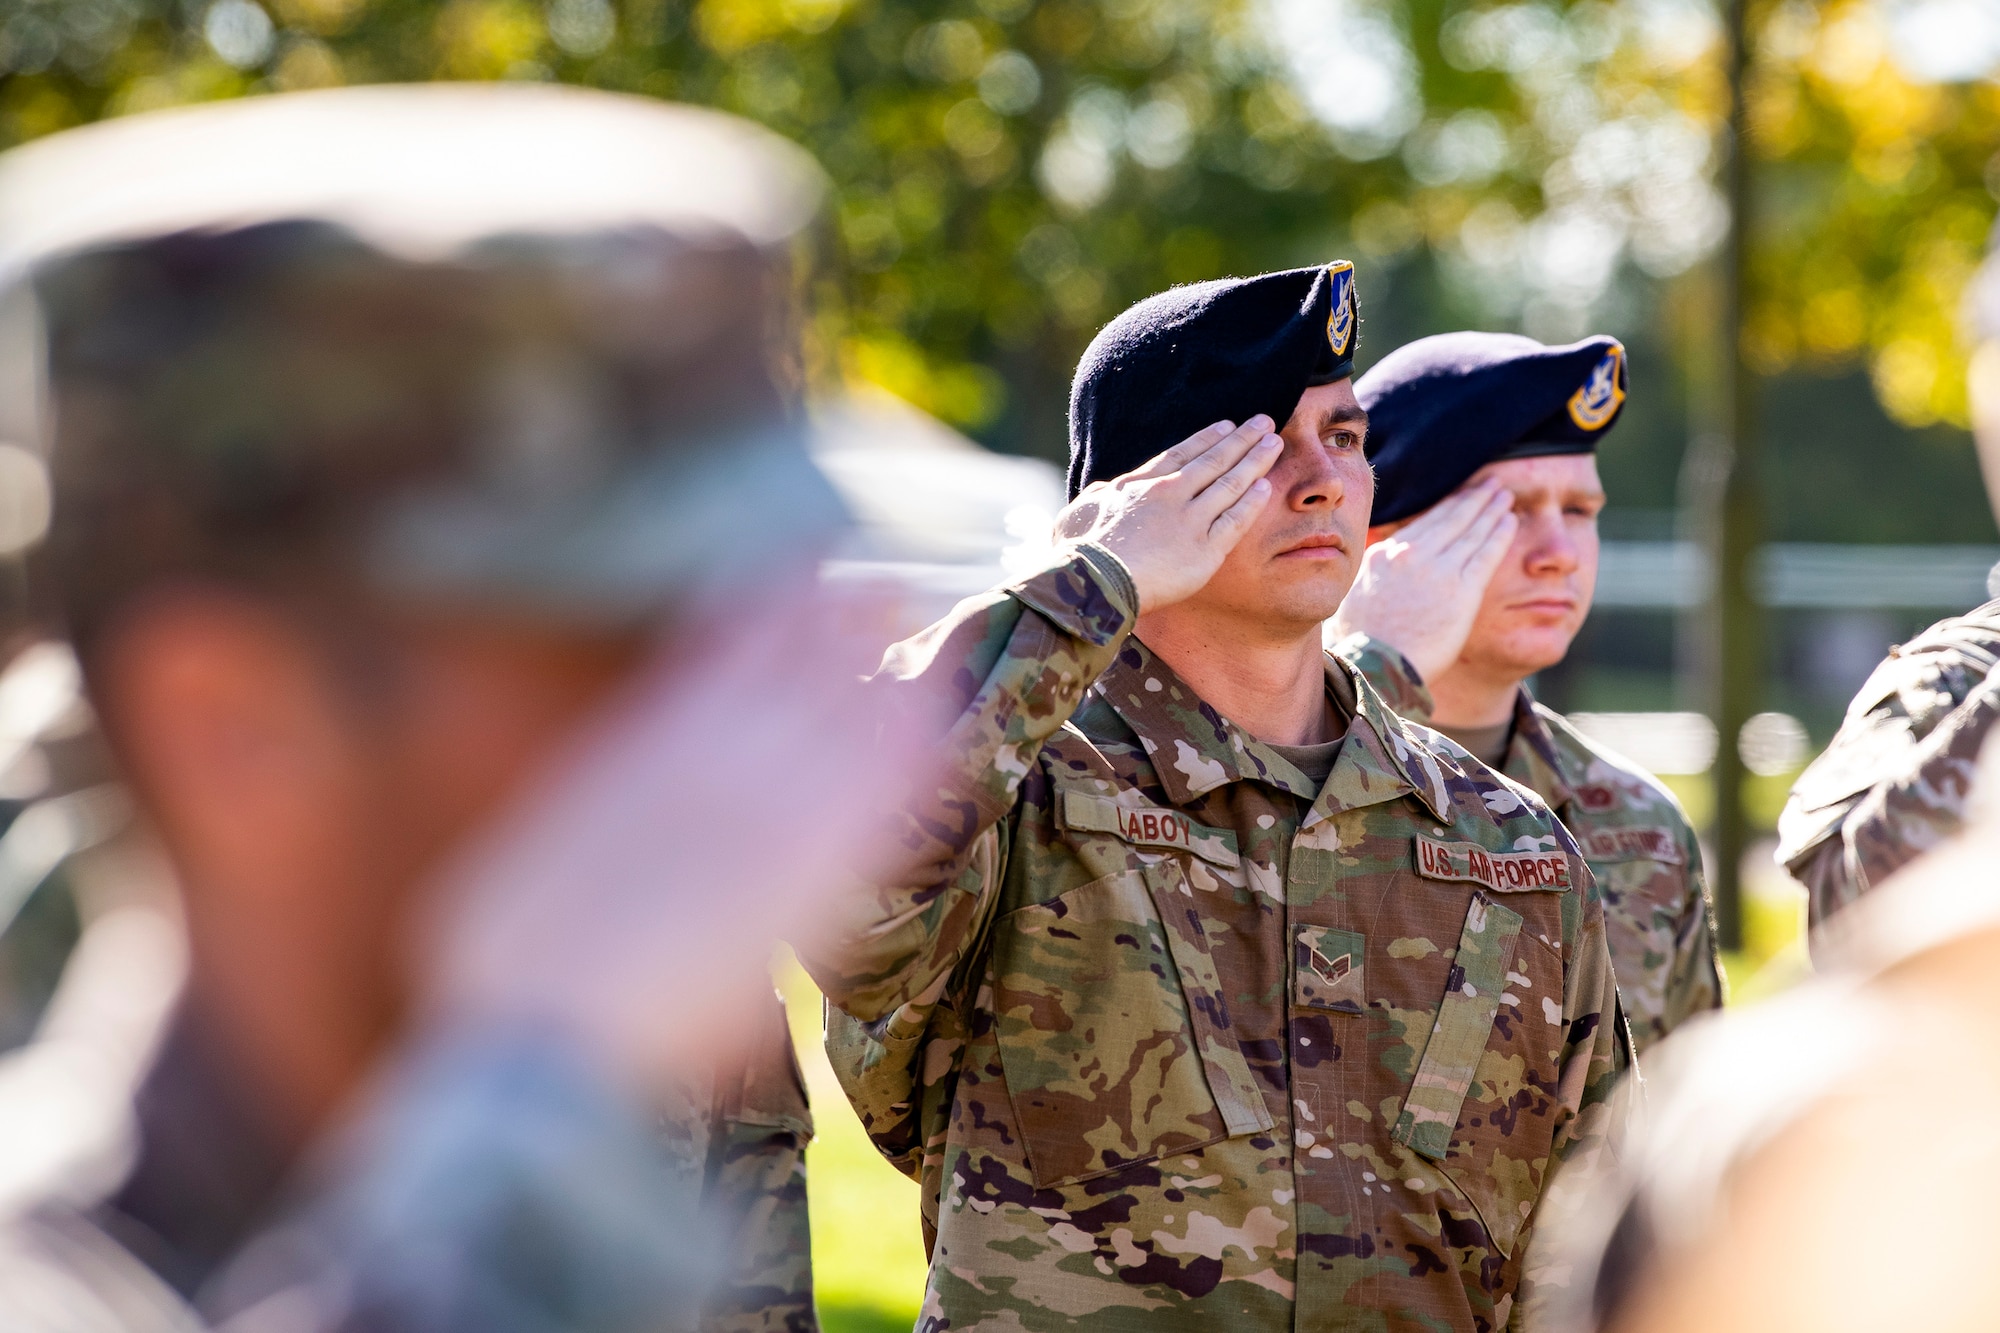 Airmen from the 422d Security Forces Squadron salute during a retreat ceremony at RAF Croughton, England, Oct. 15, 2021.  The ceremony concluded Police week in which defenders from the 422d and 423rd SFS paid homage to those who lost their lives in the line of duty. (U.S. Air Force photo by Senior Airman Eugene Oliver)